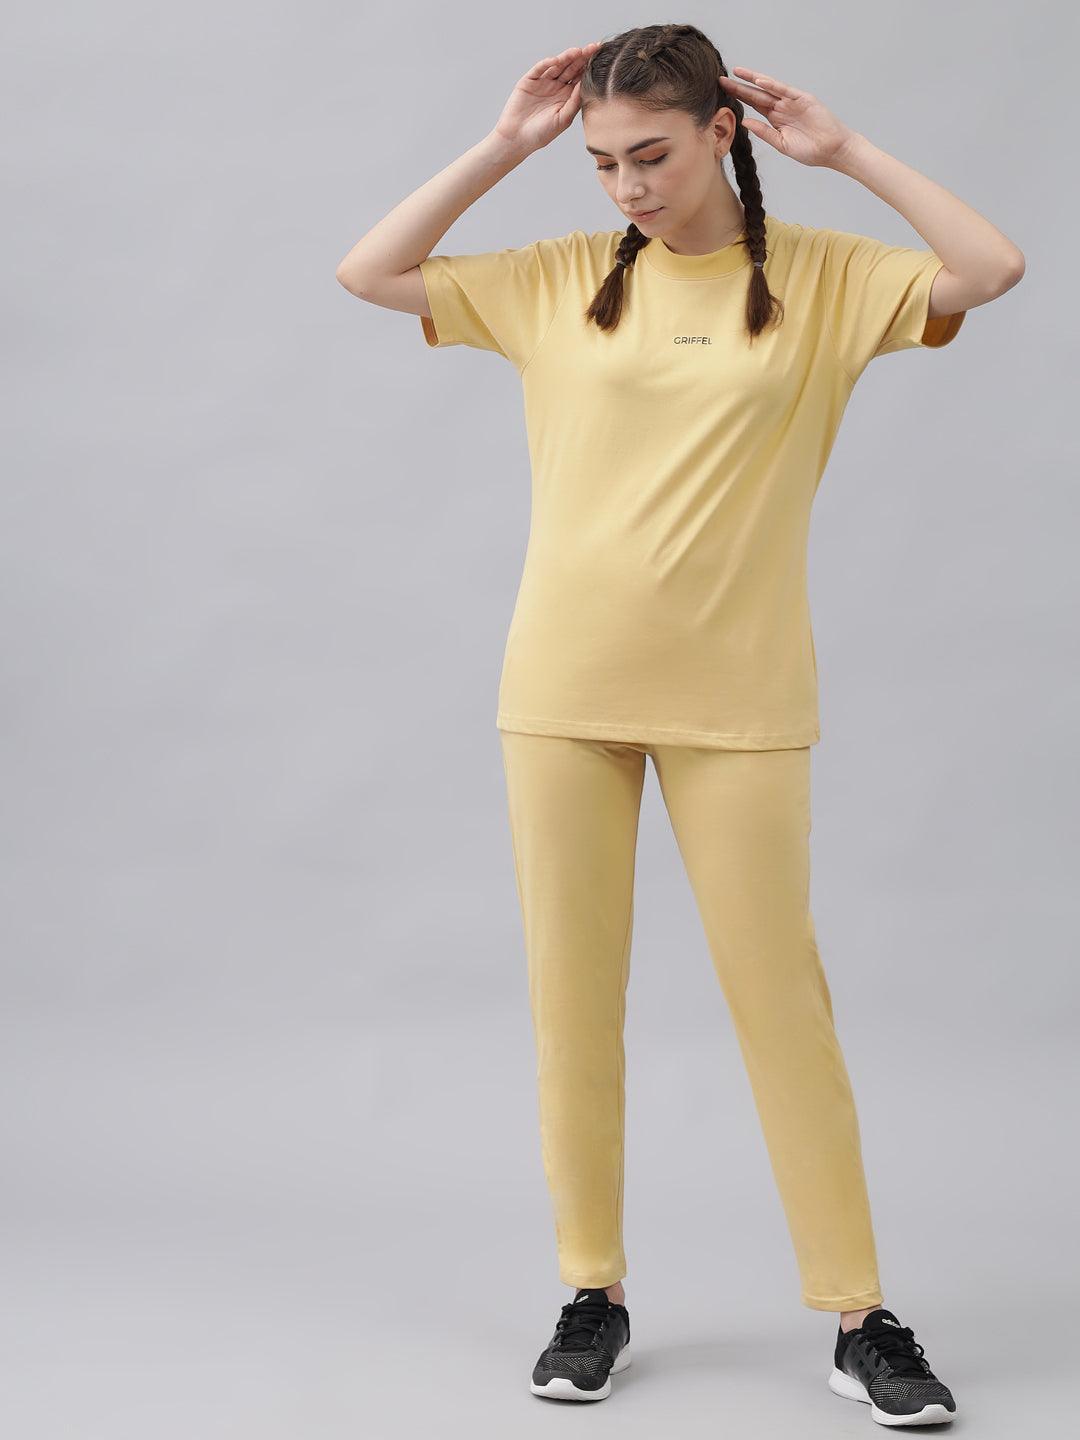 GRIFFEL Women Basic Solid Regular Fit Yellow Trackpant - griffel